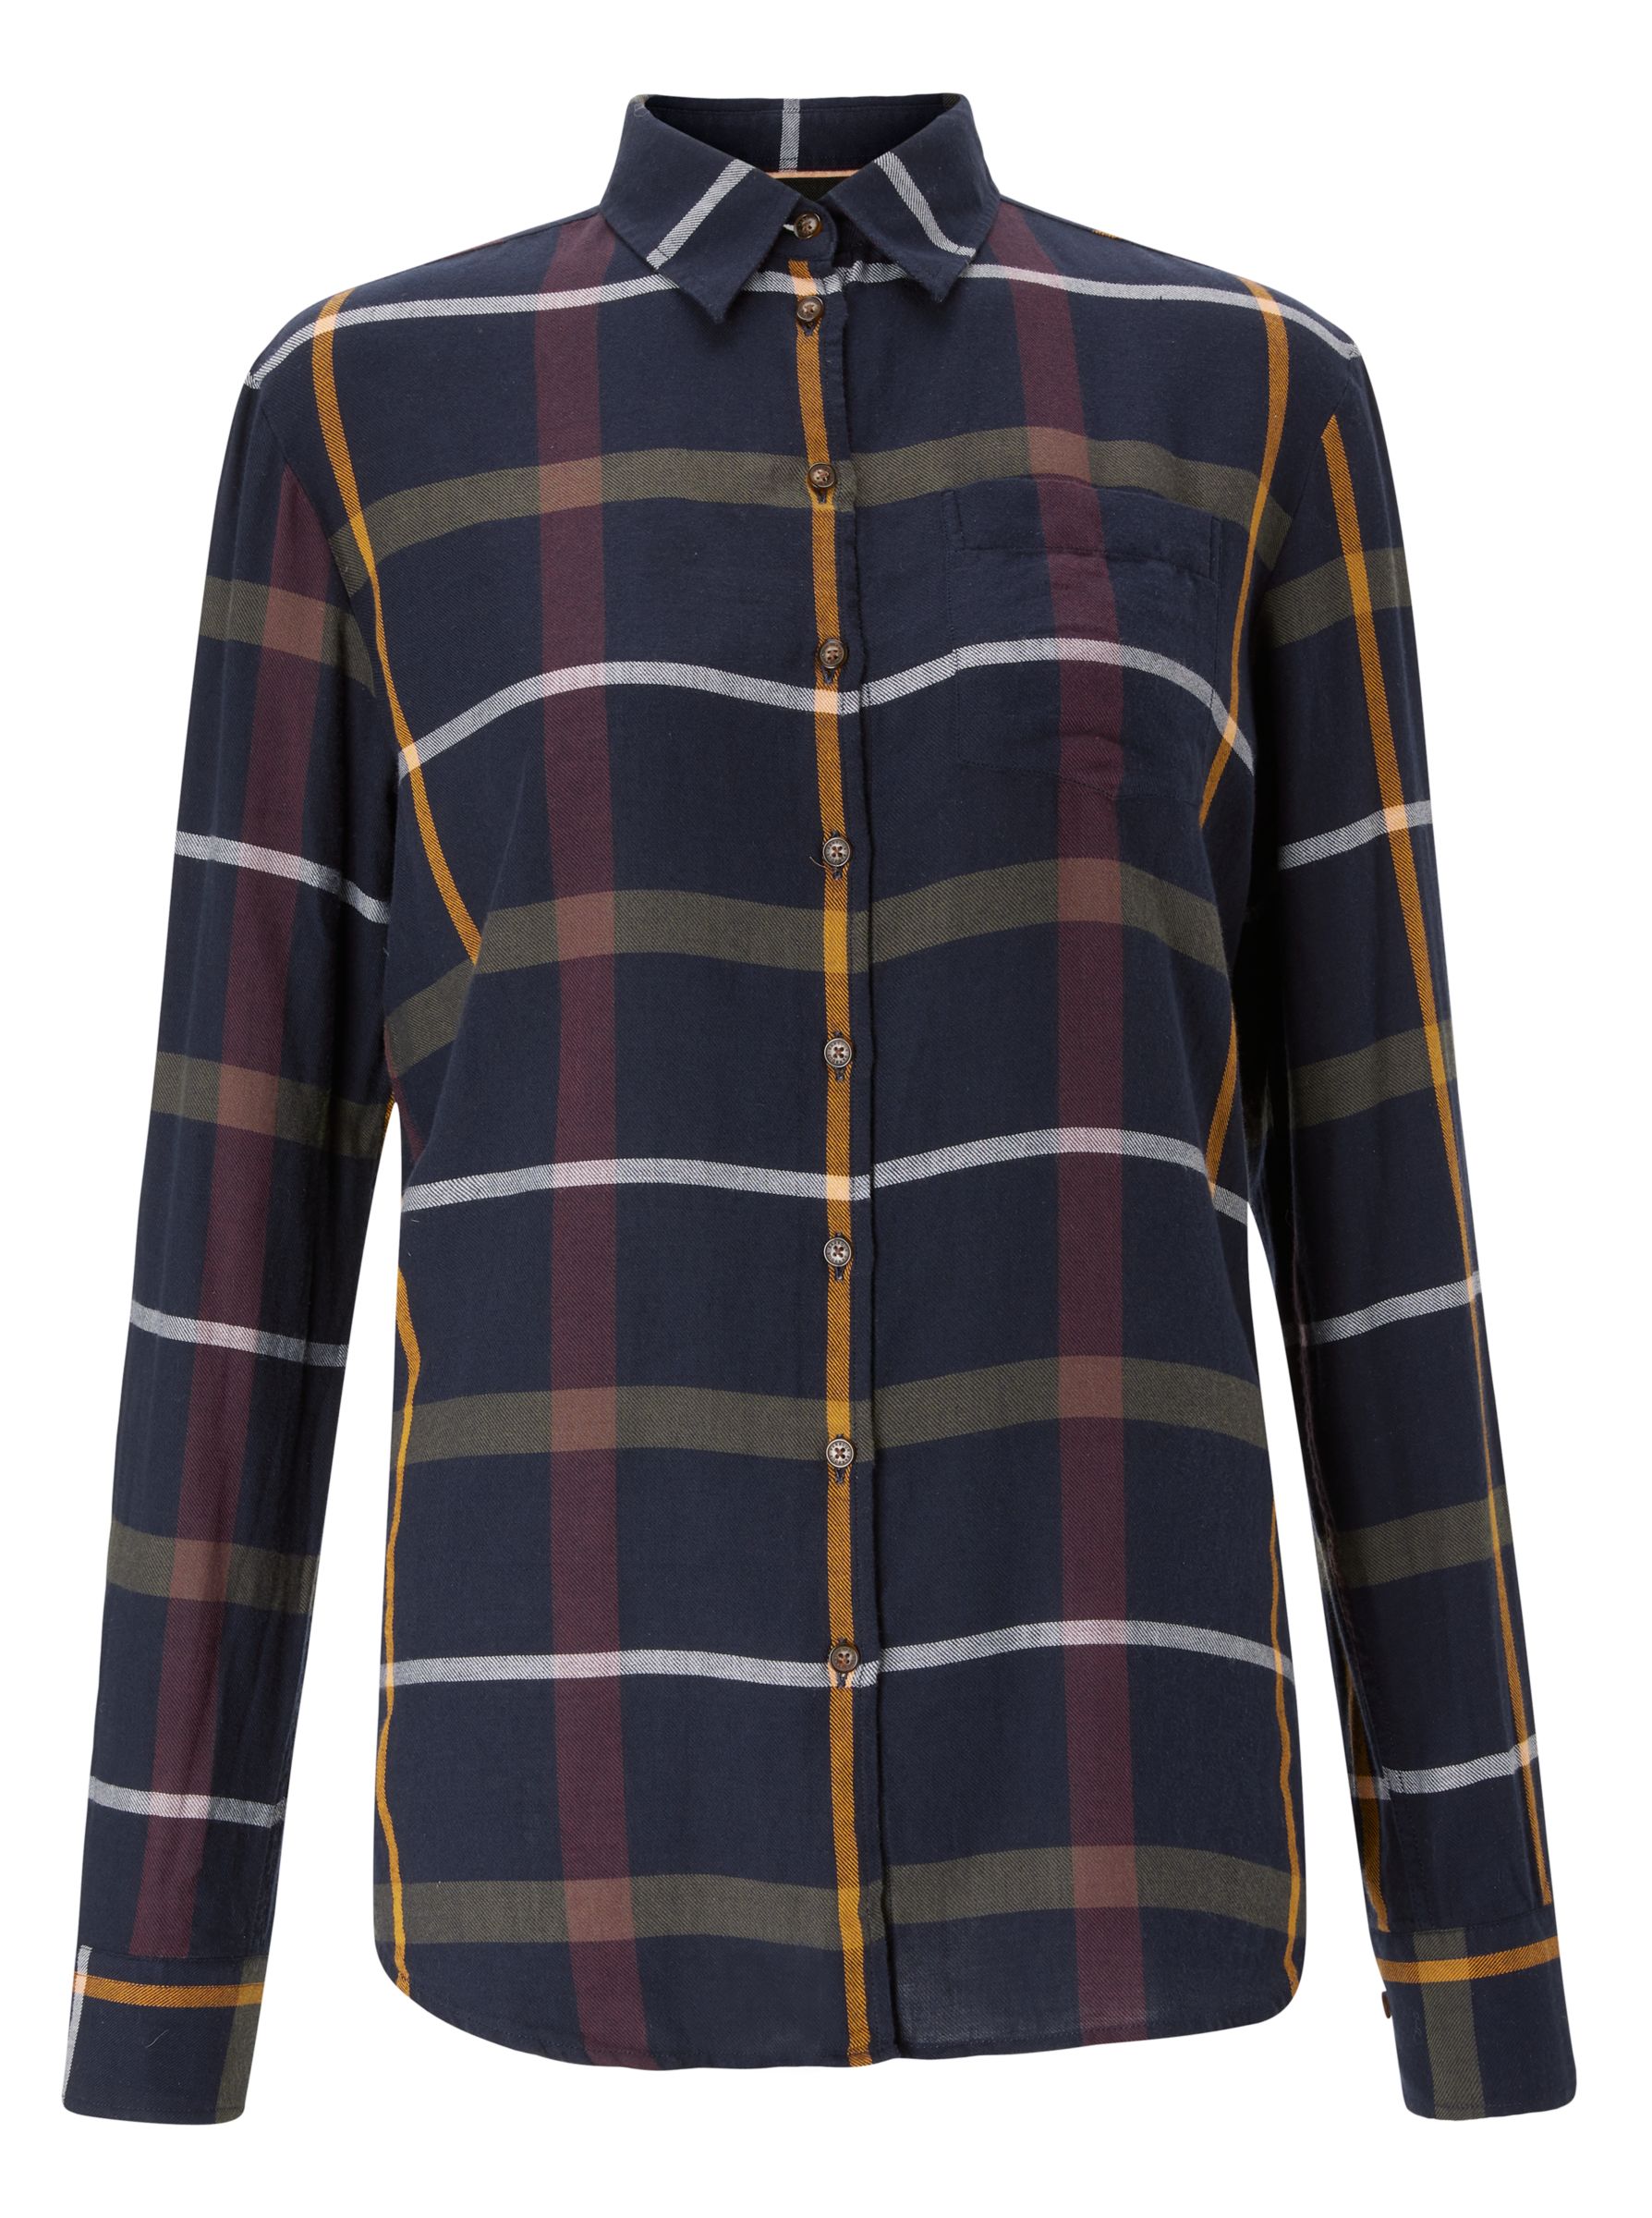 Barbour Oxer Check Shirt, Navy Multi at 